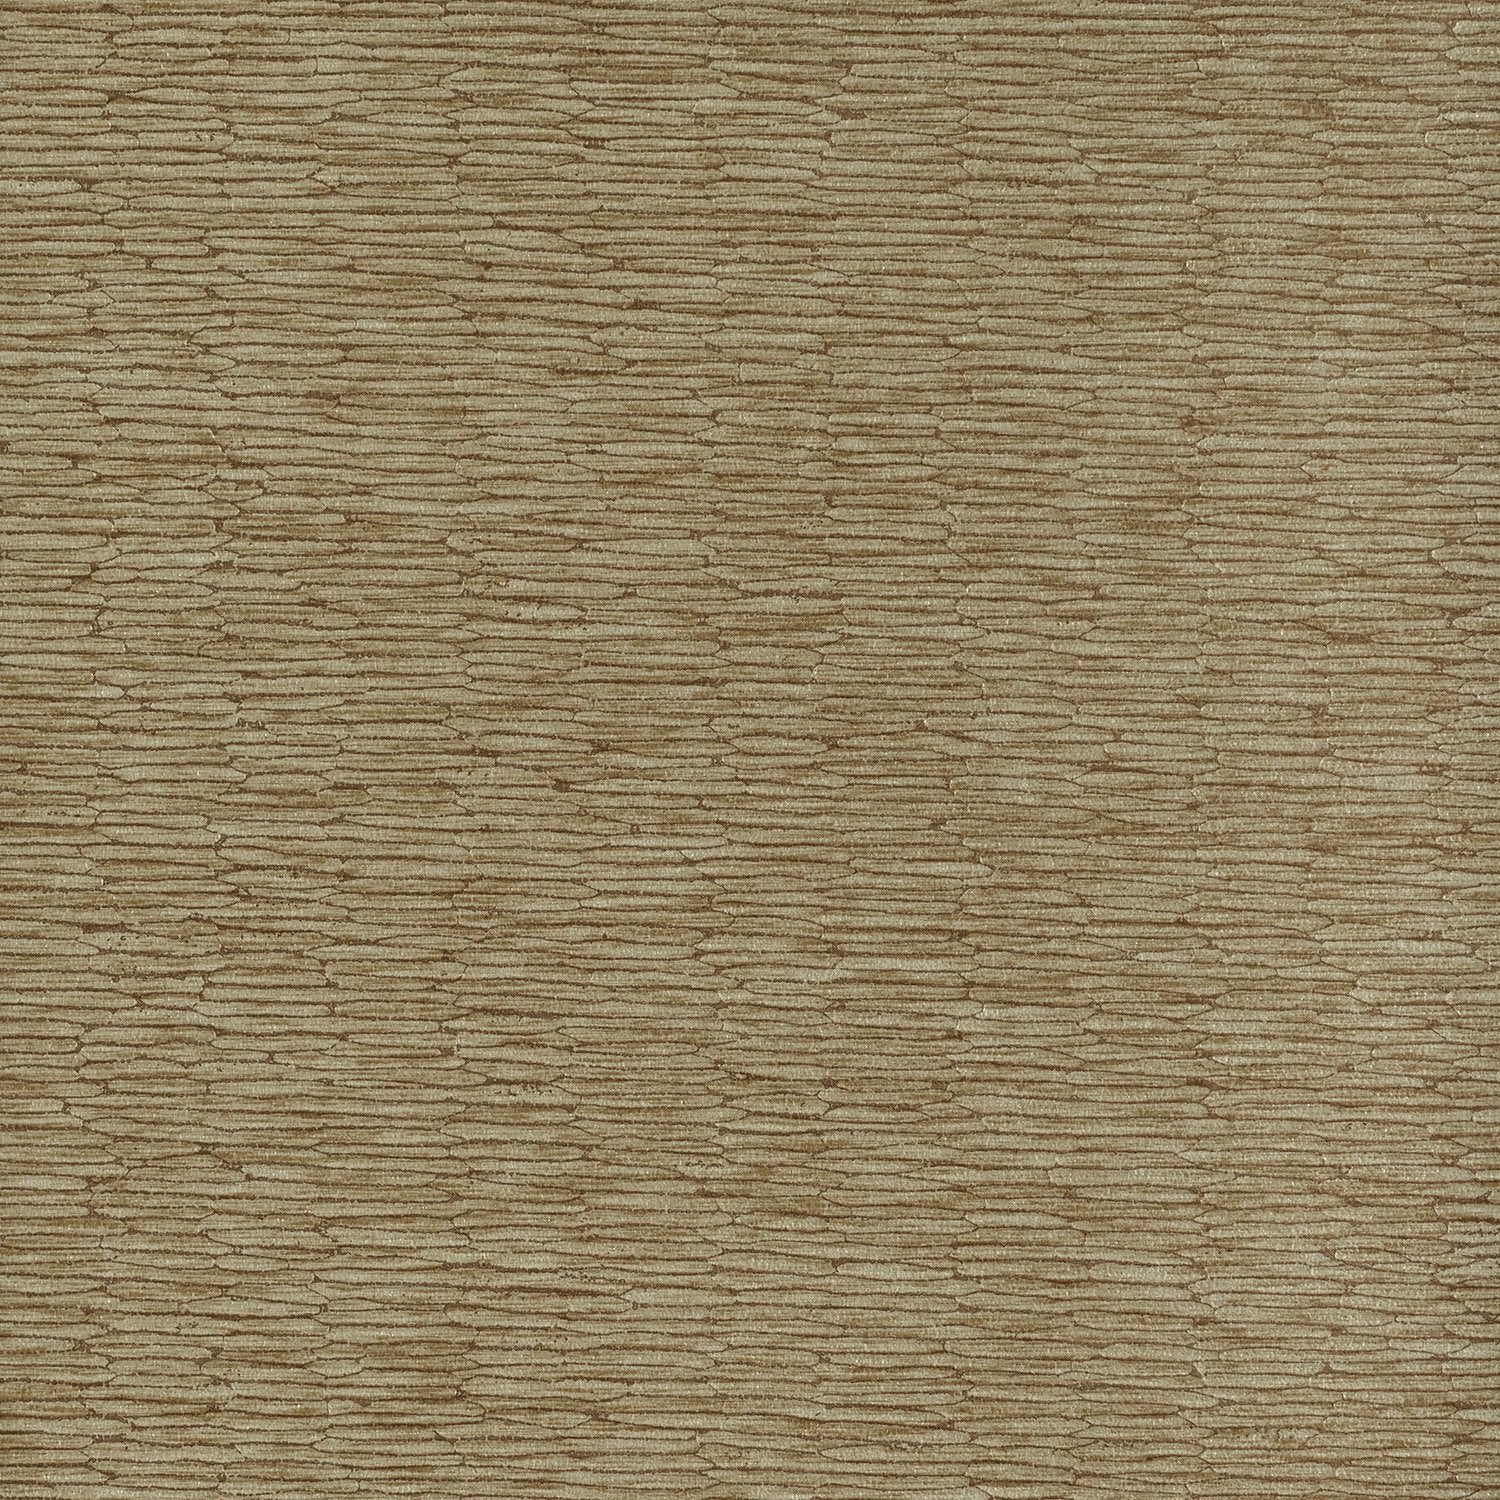 Chipper - Y46852 - Wallcovering - Vycon - Kube Contract